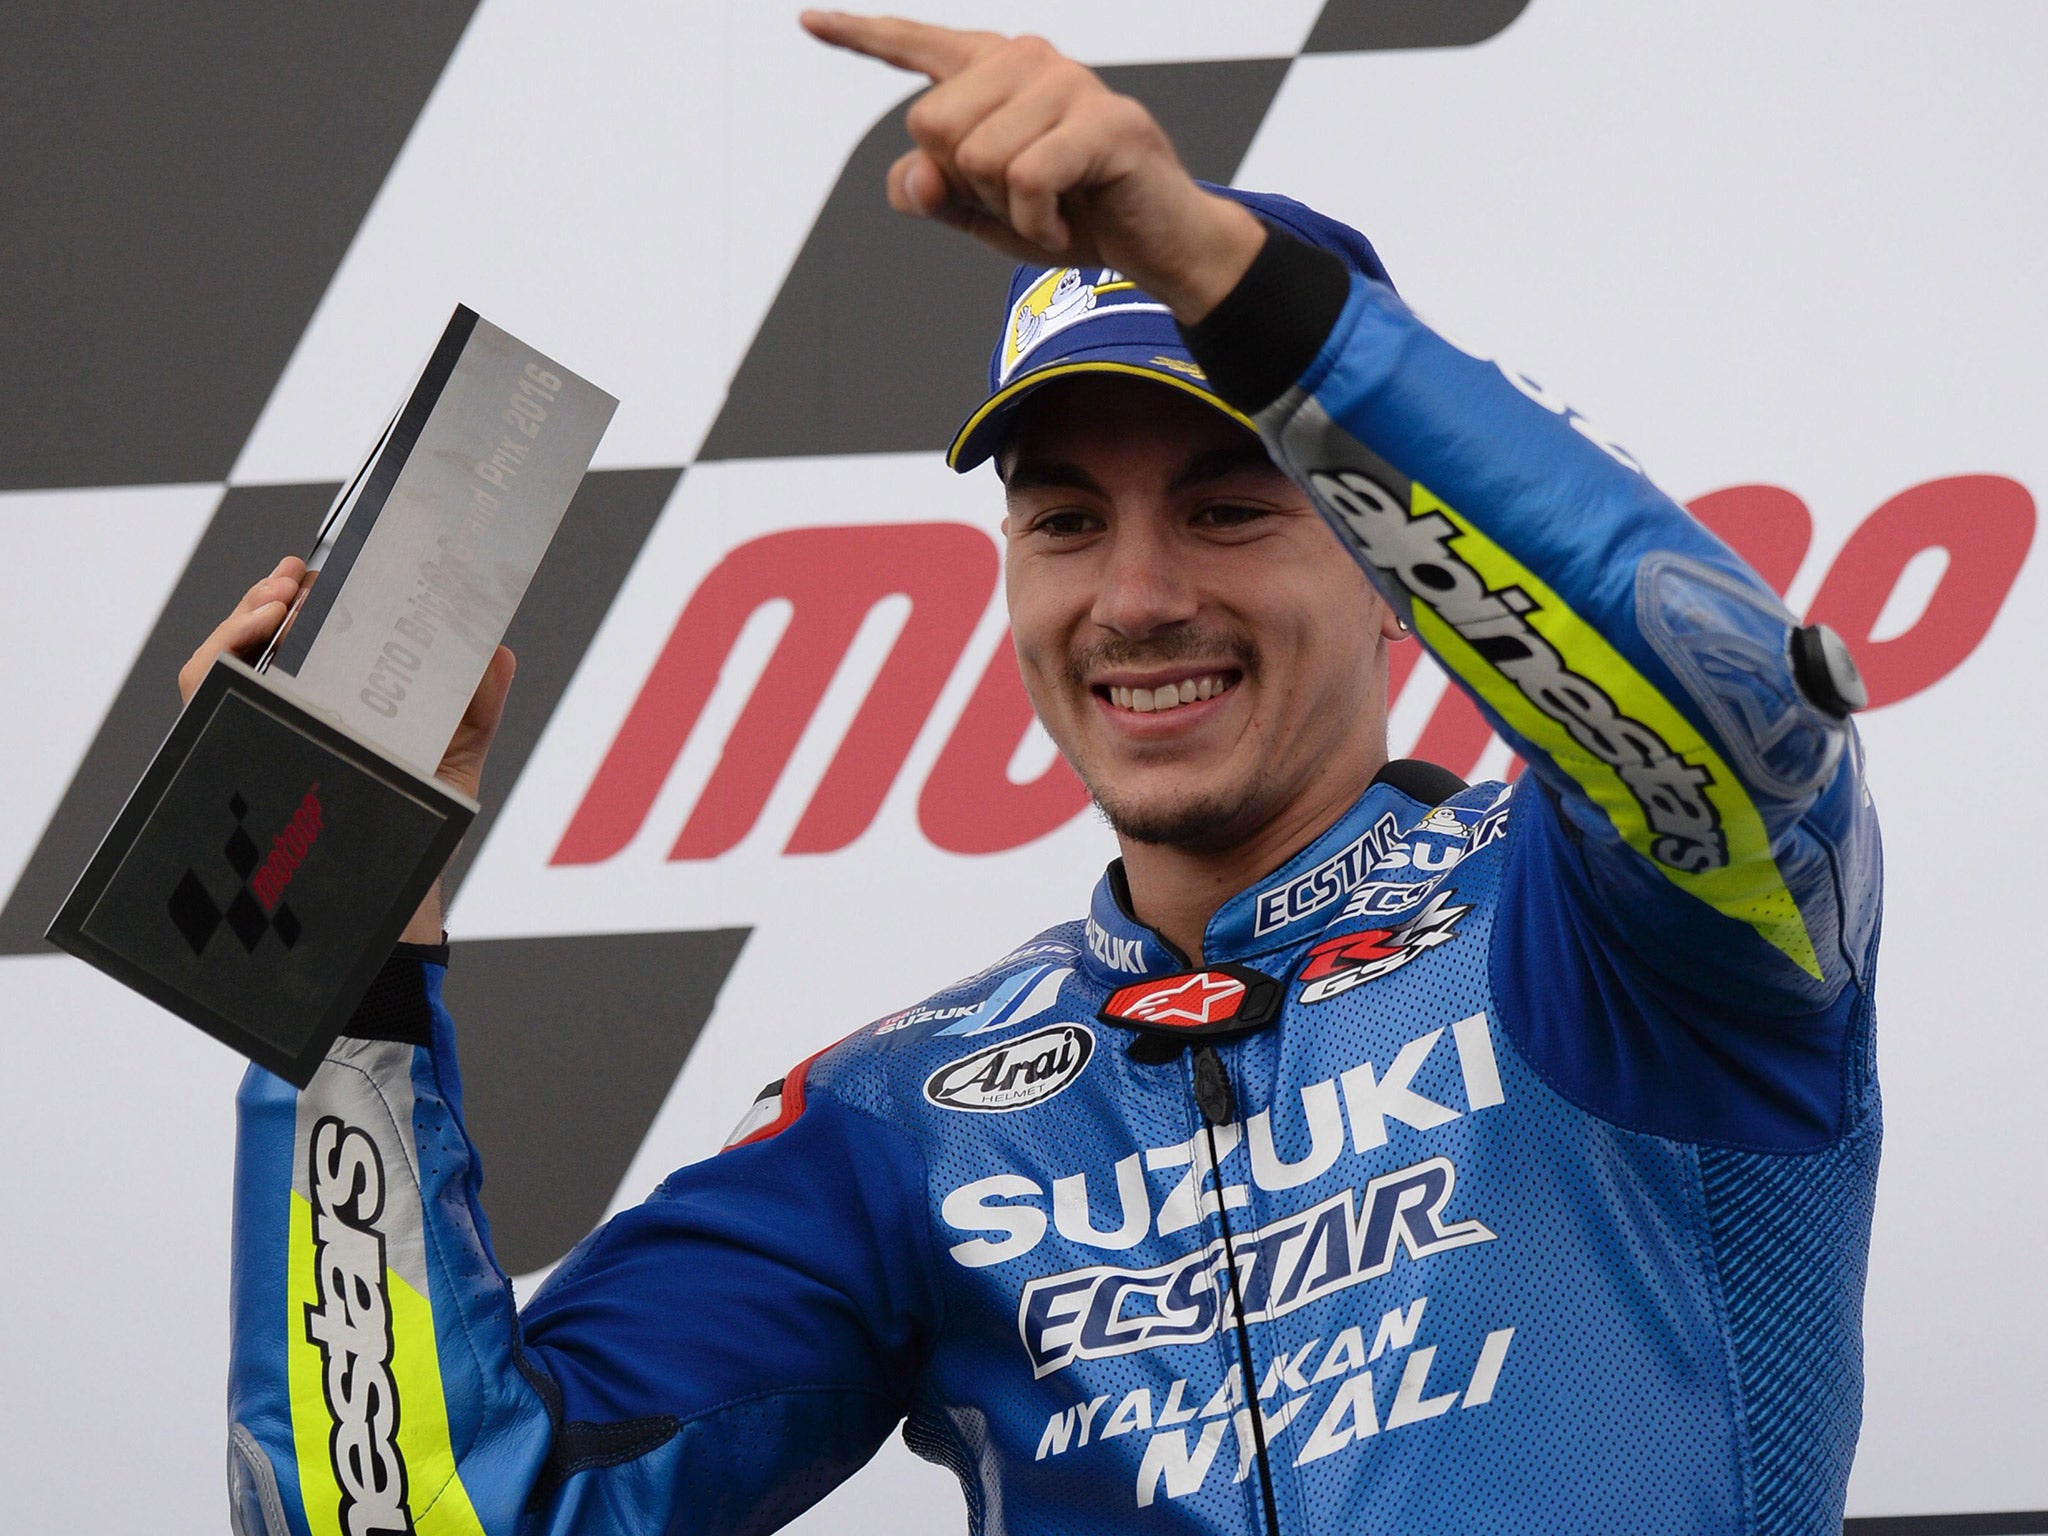 Vinales celebrates his first victory in MotoGP